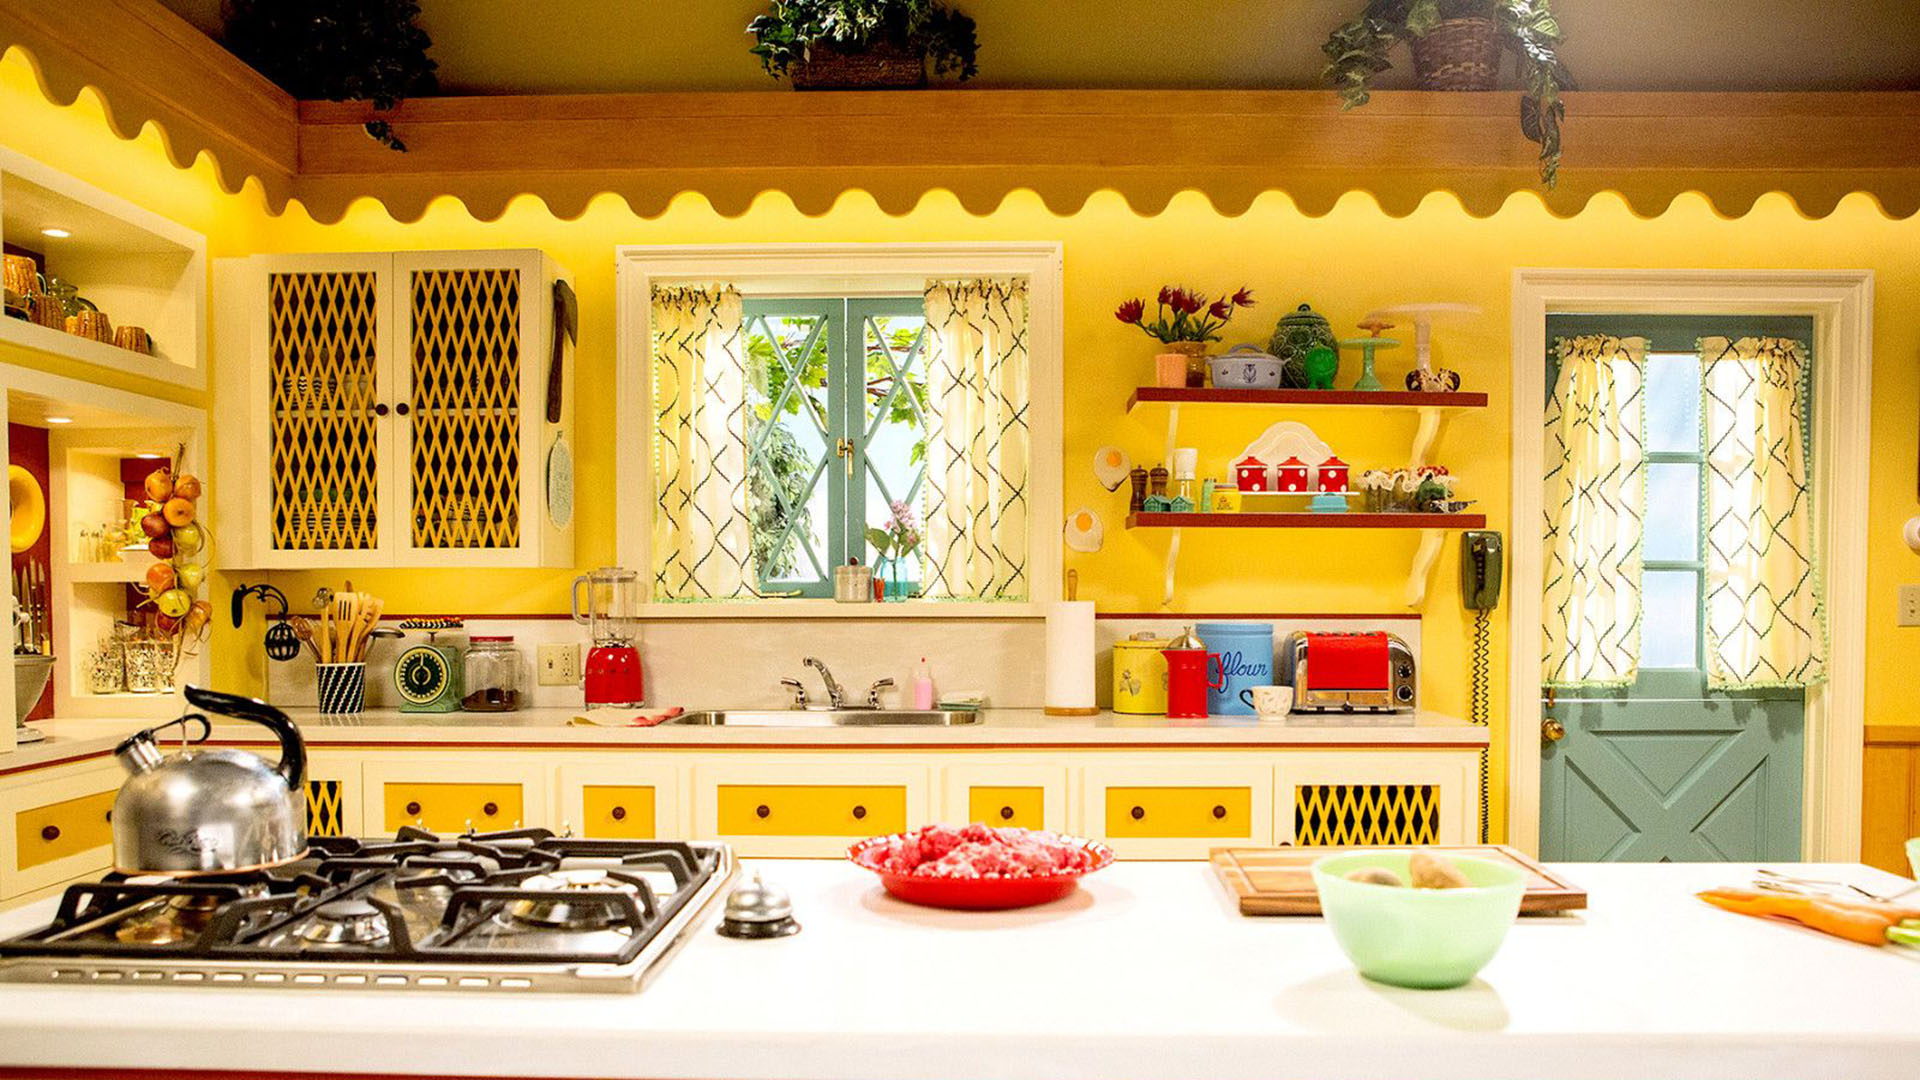 At Home with Amy Sedaris kitchen background